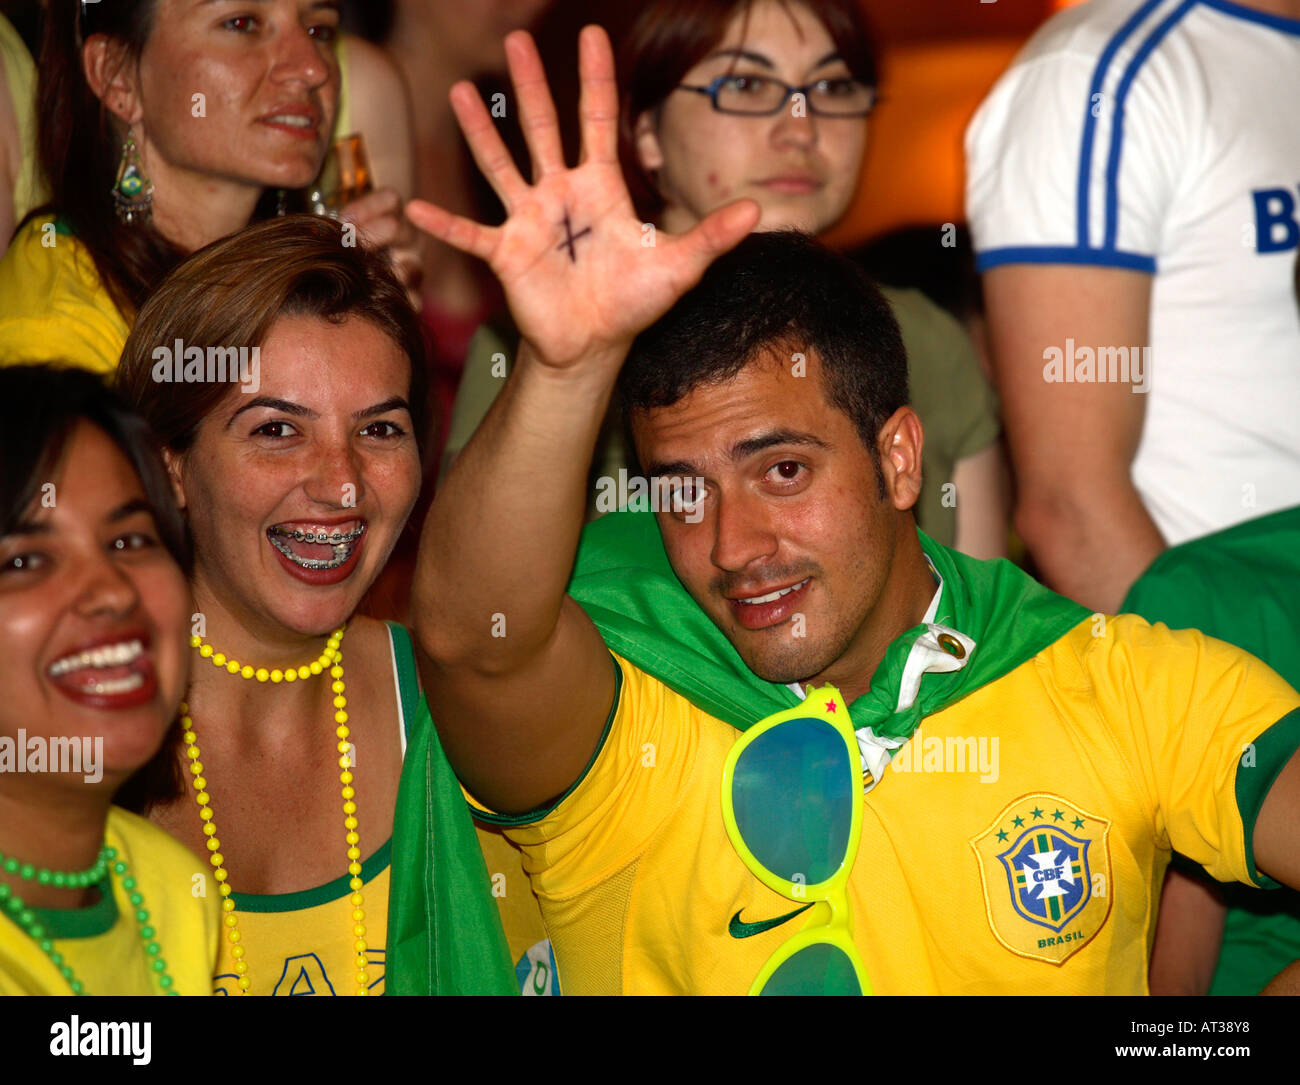 Brasilian fans cheering on their team in 2006 World Cup quarter-final vs France, On Anon Bar, London Stock Photo